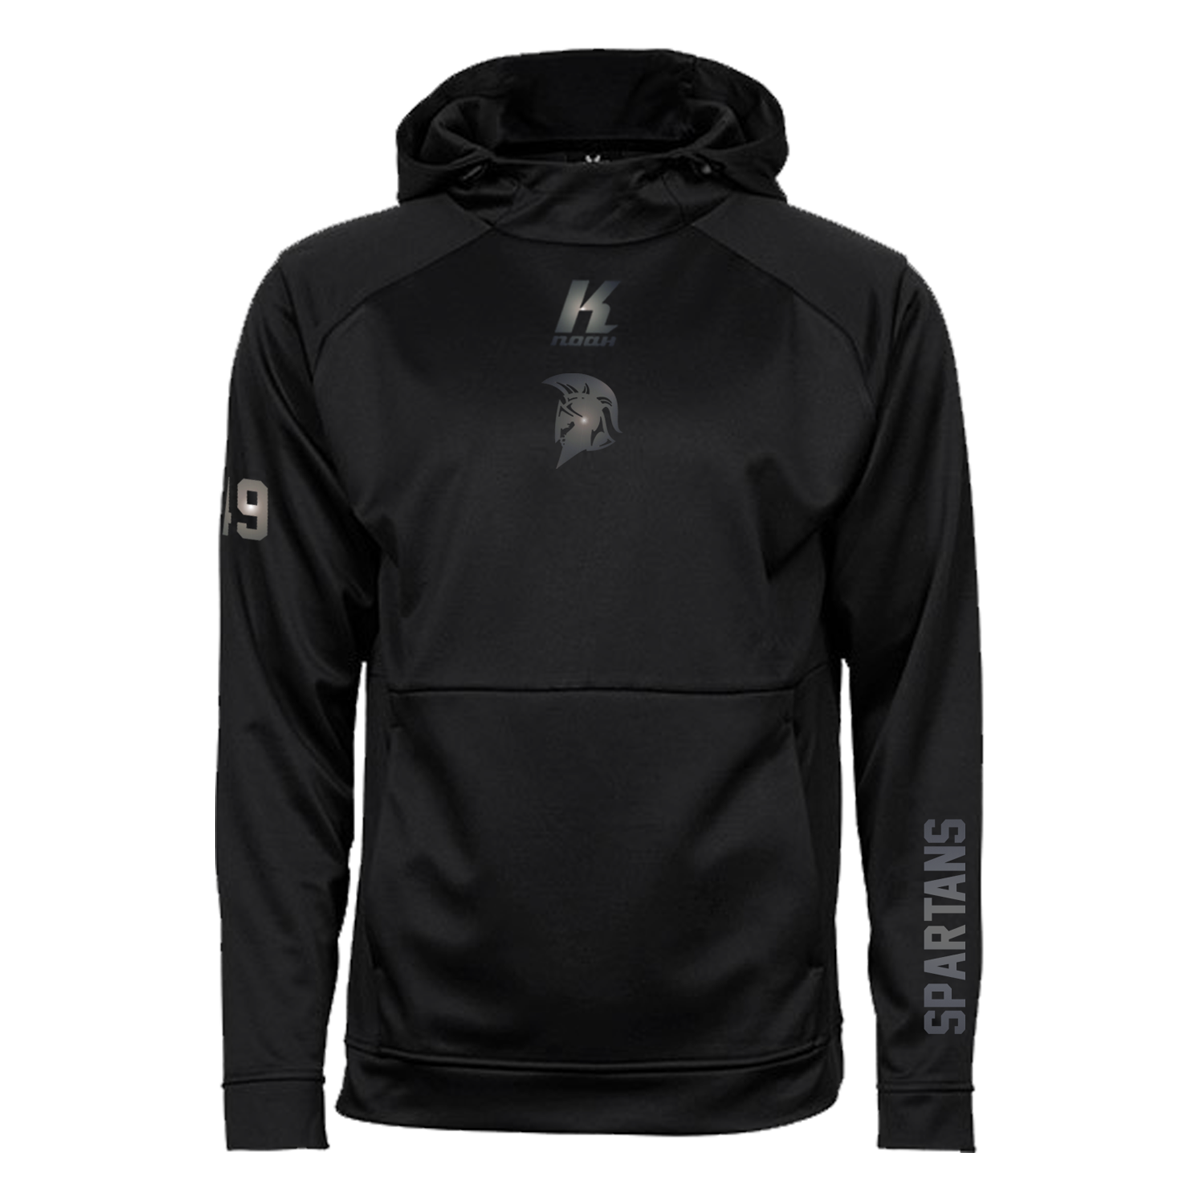 Spartans "Blackline" Performance Hoodie JH006 with Playernumber or Initials